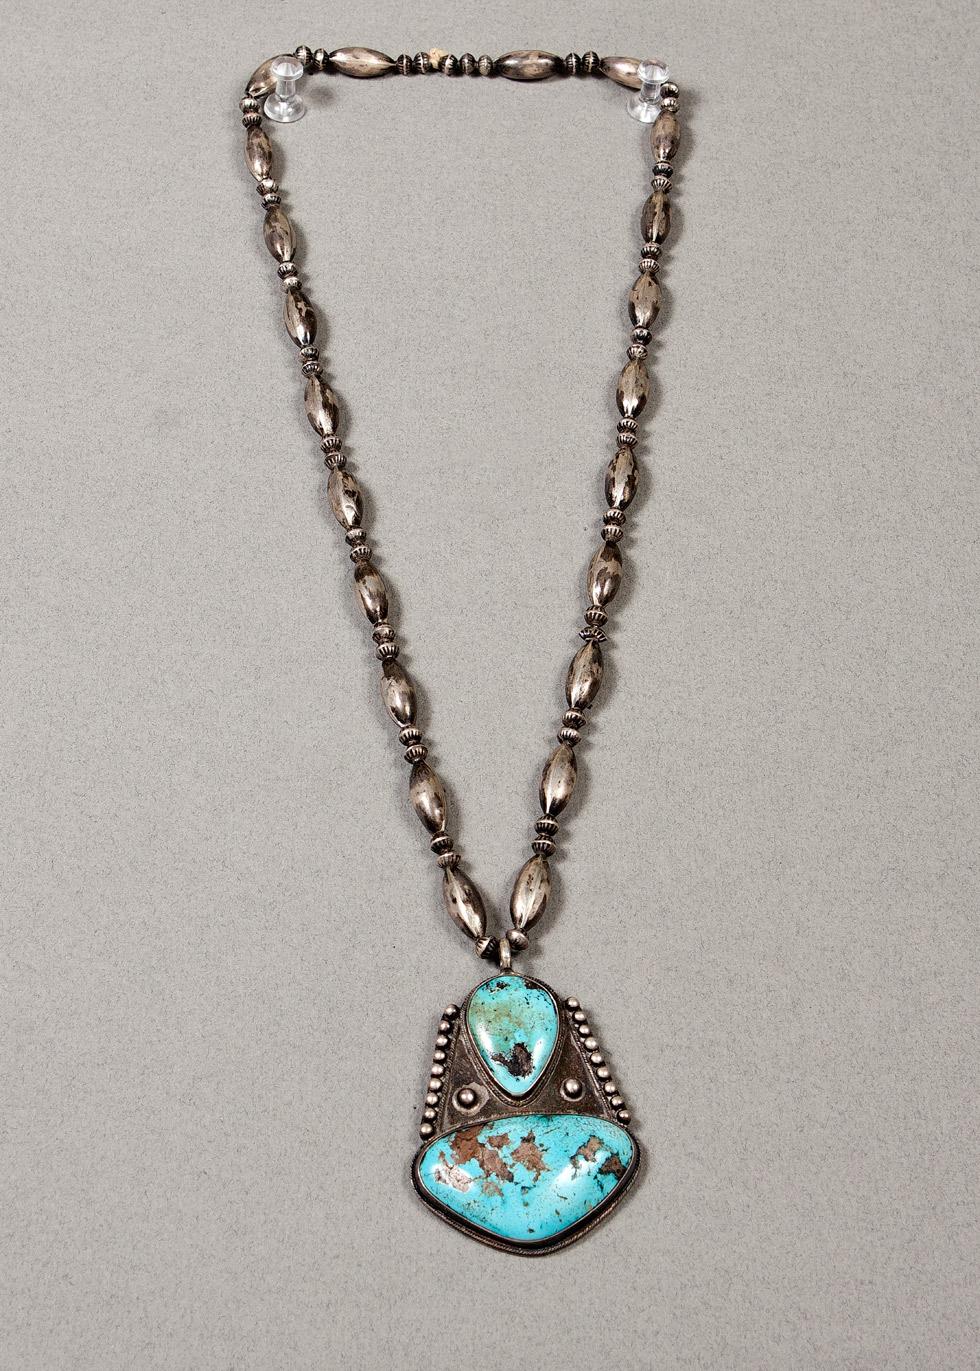 Pendant with Two Pieces of Turqouise on a Handmade Chain, Date unknown, Maker unknown, 89.016.625. Gift of Edwin L. and Ruth E. Kennedy.